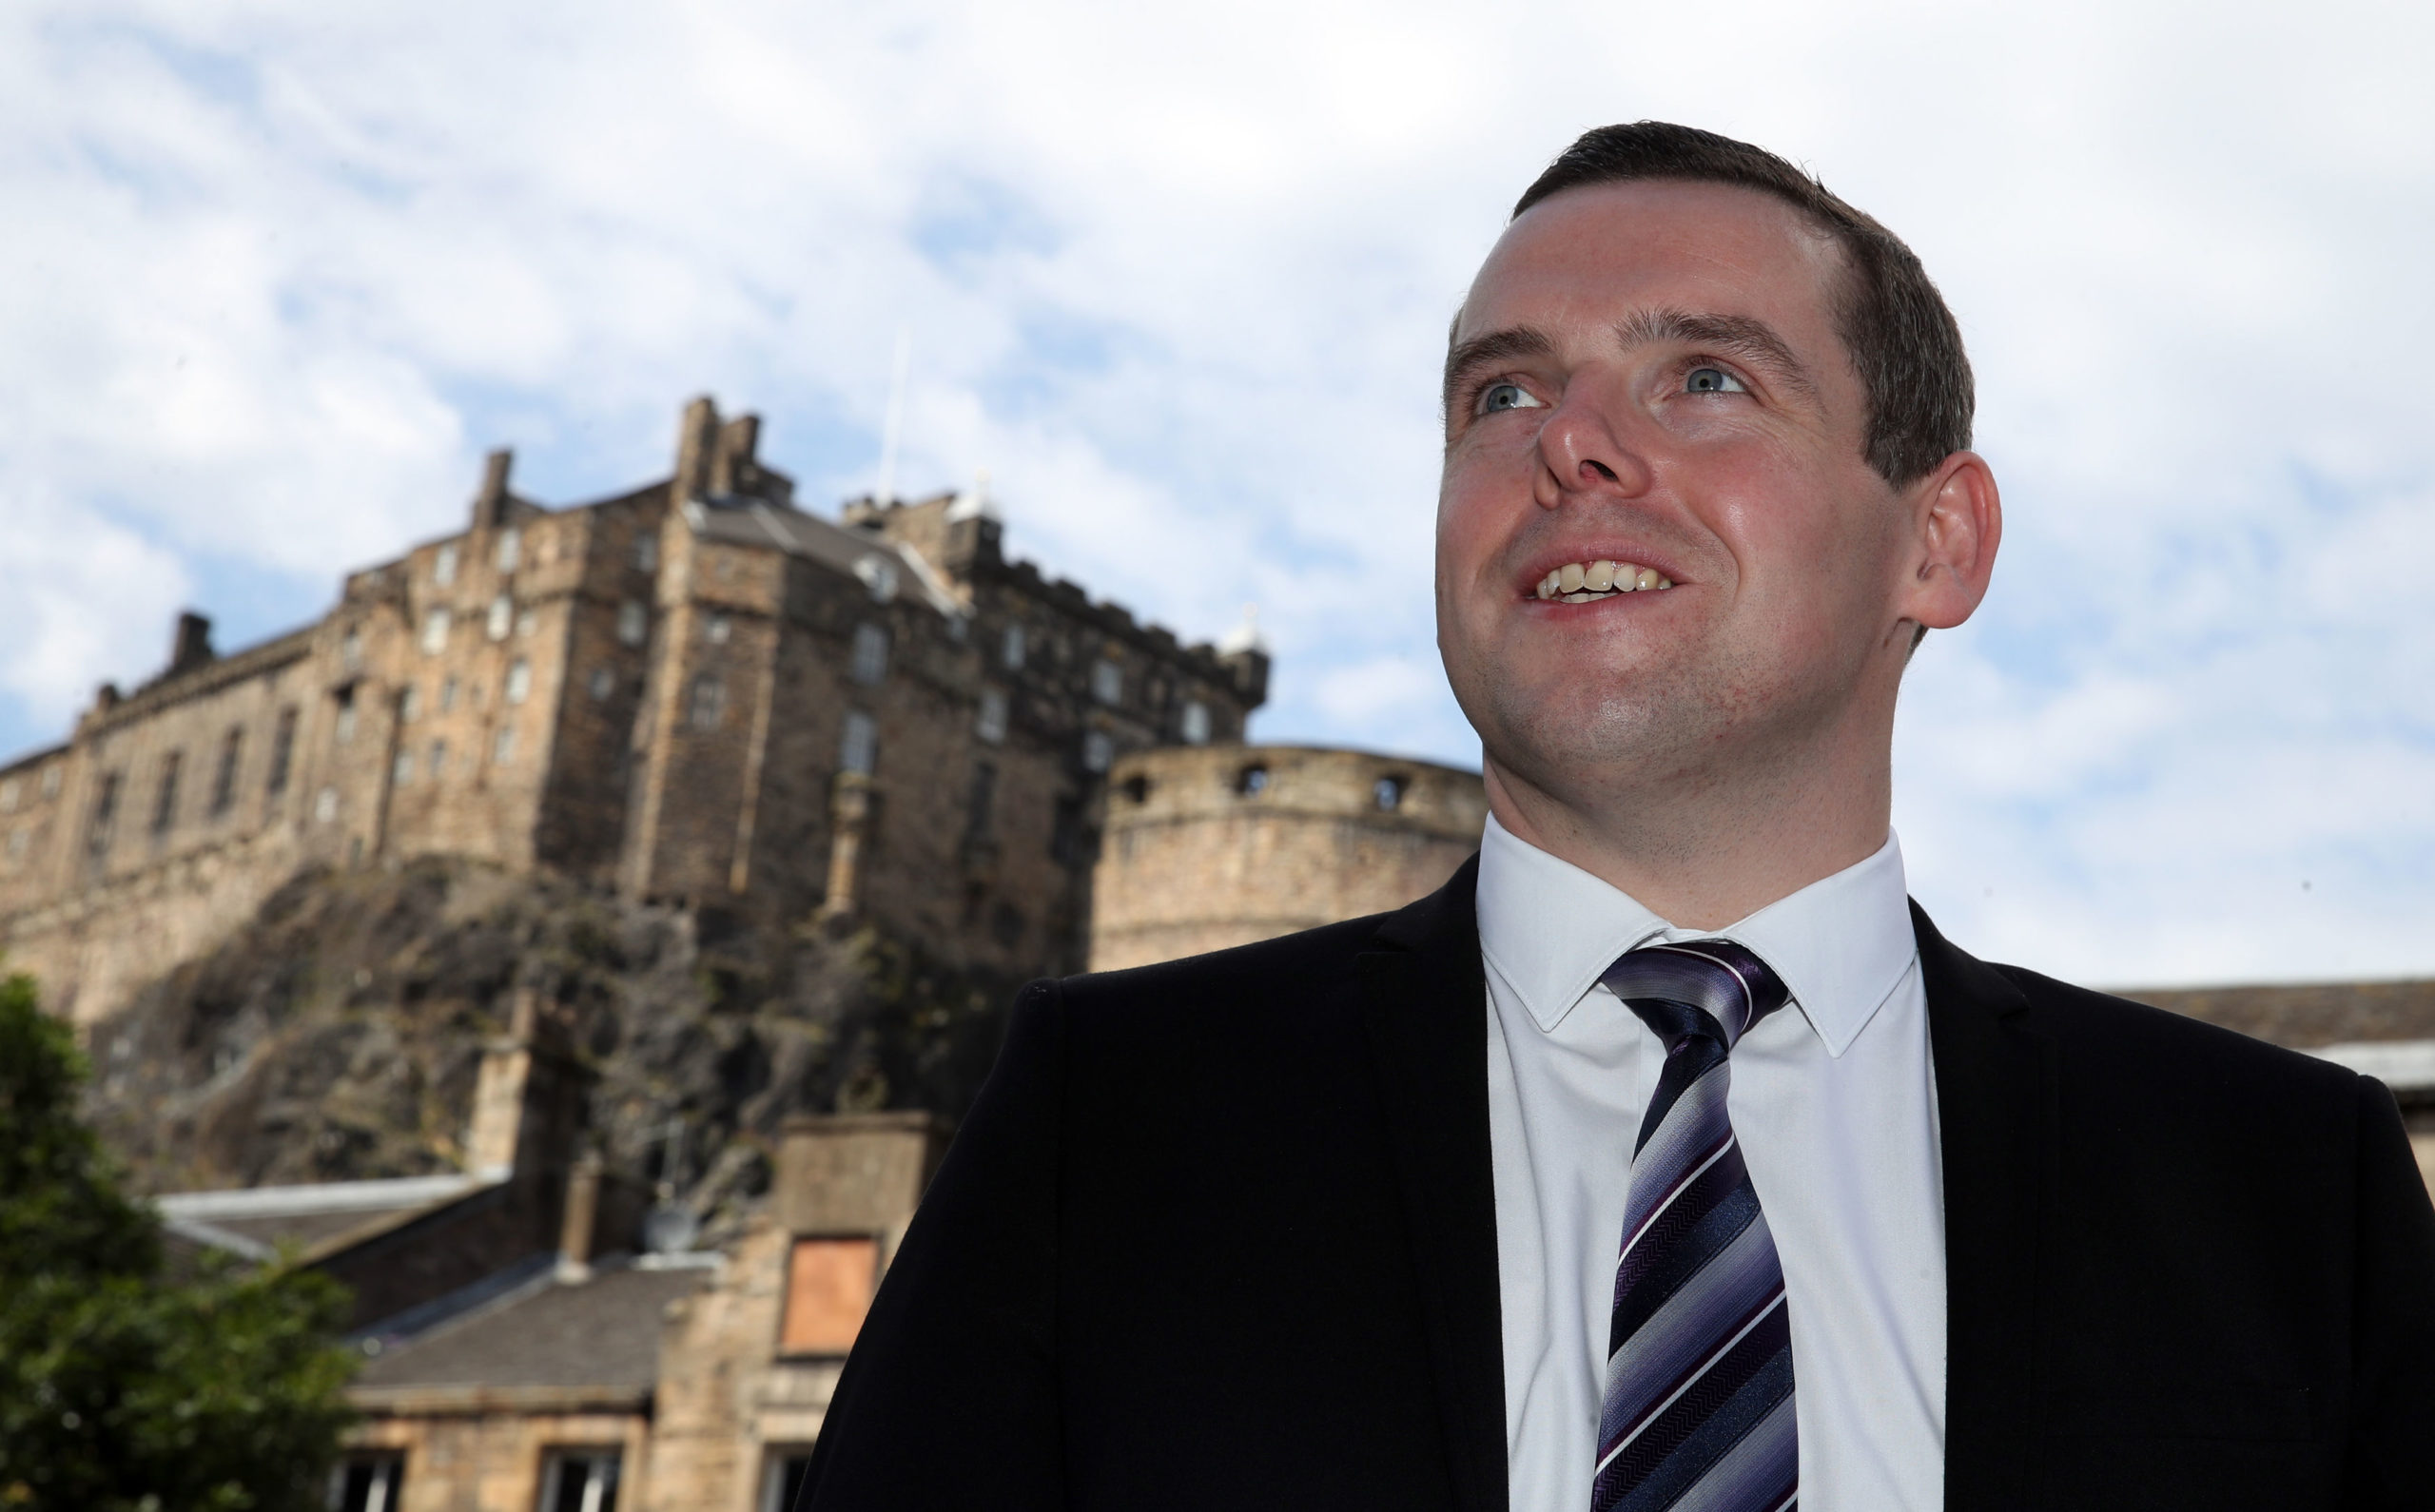 Scottish Conservative MP Douglas Ross in Edinburgh, after he confirmed he will stand for the leadership of the Scottish Conservatives.